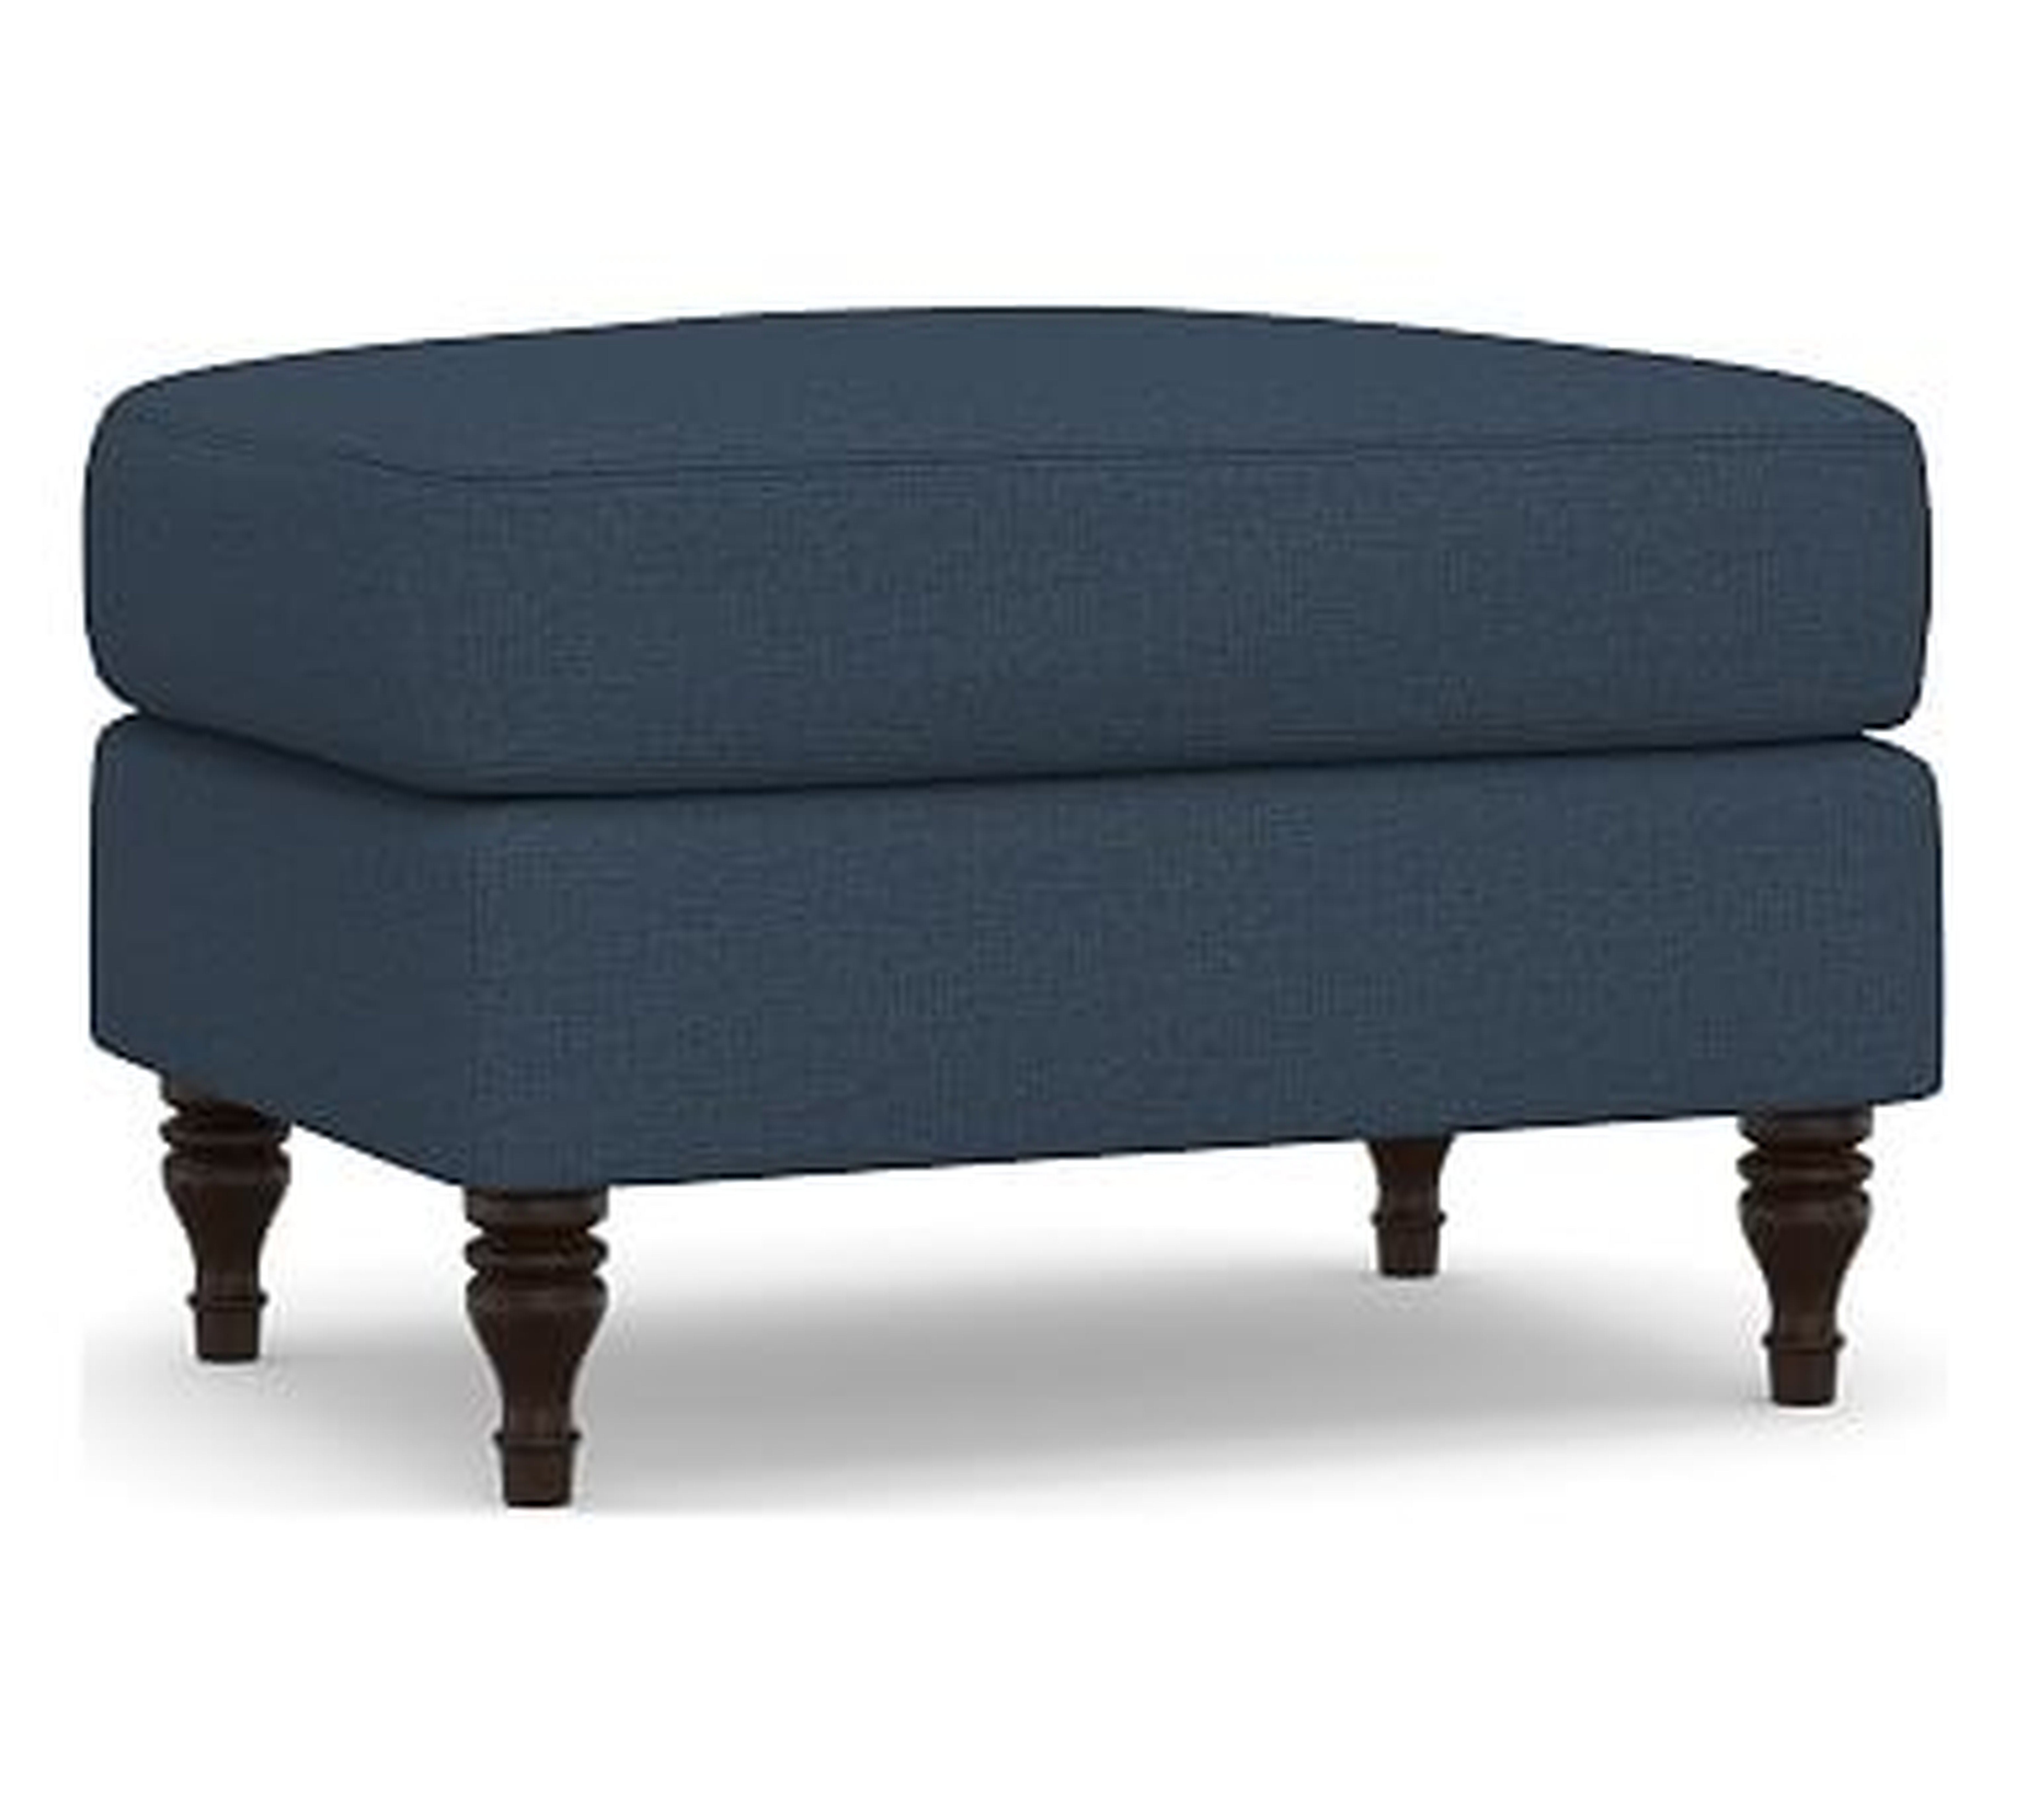 Carlisle English Arm Upholstered Ottoman, Polyester Wrapped Cushions, Brushed Crossweave Navy - Pottery Barn